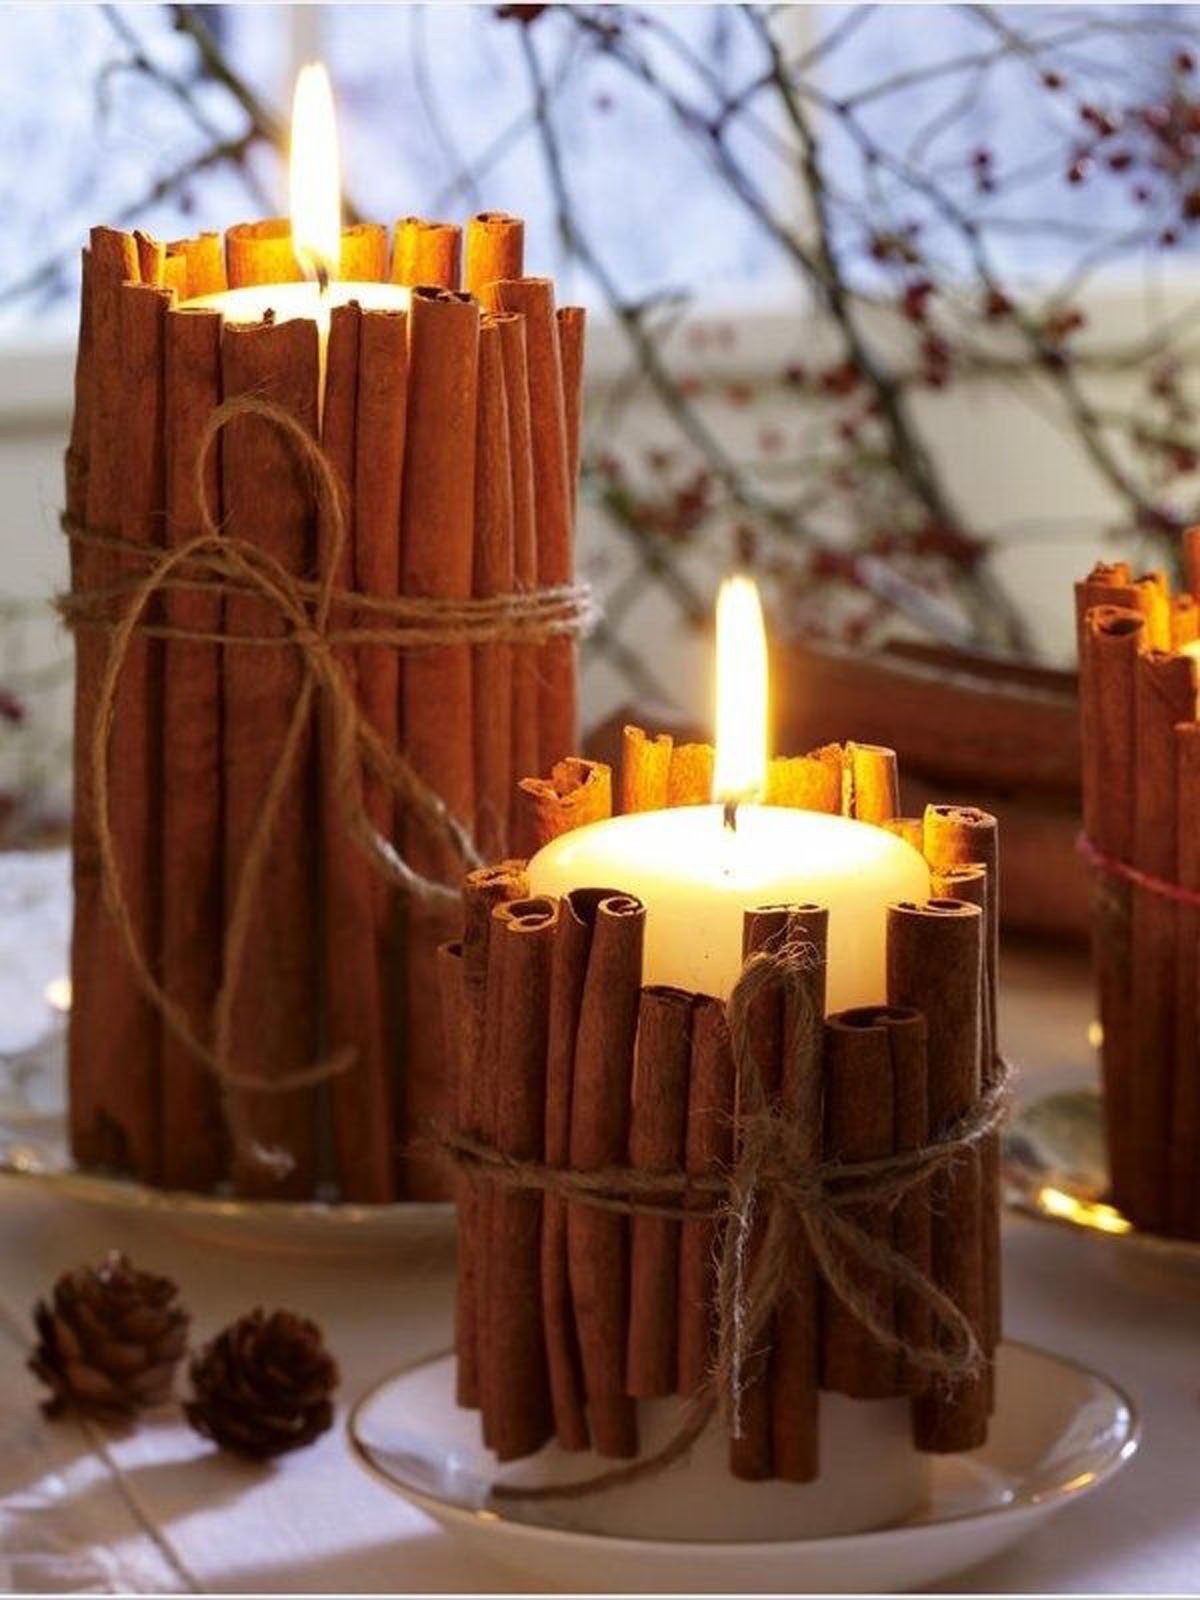 Cinnamon Stick Candles Make an Irresistible Table Piece